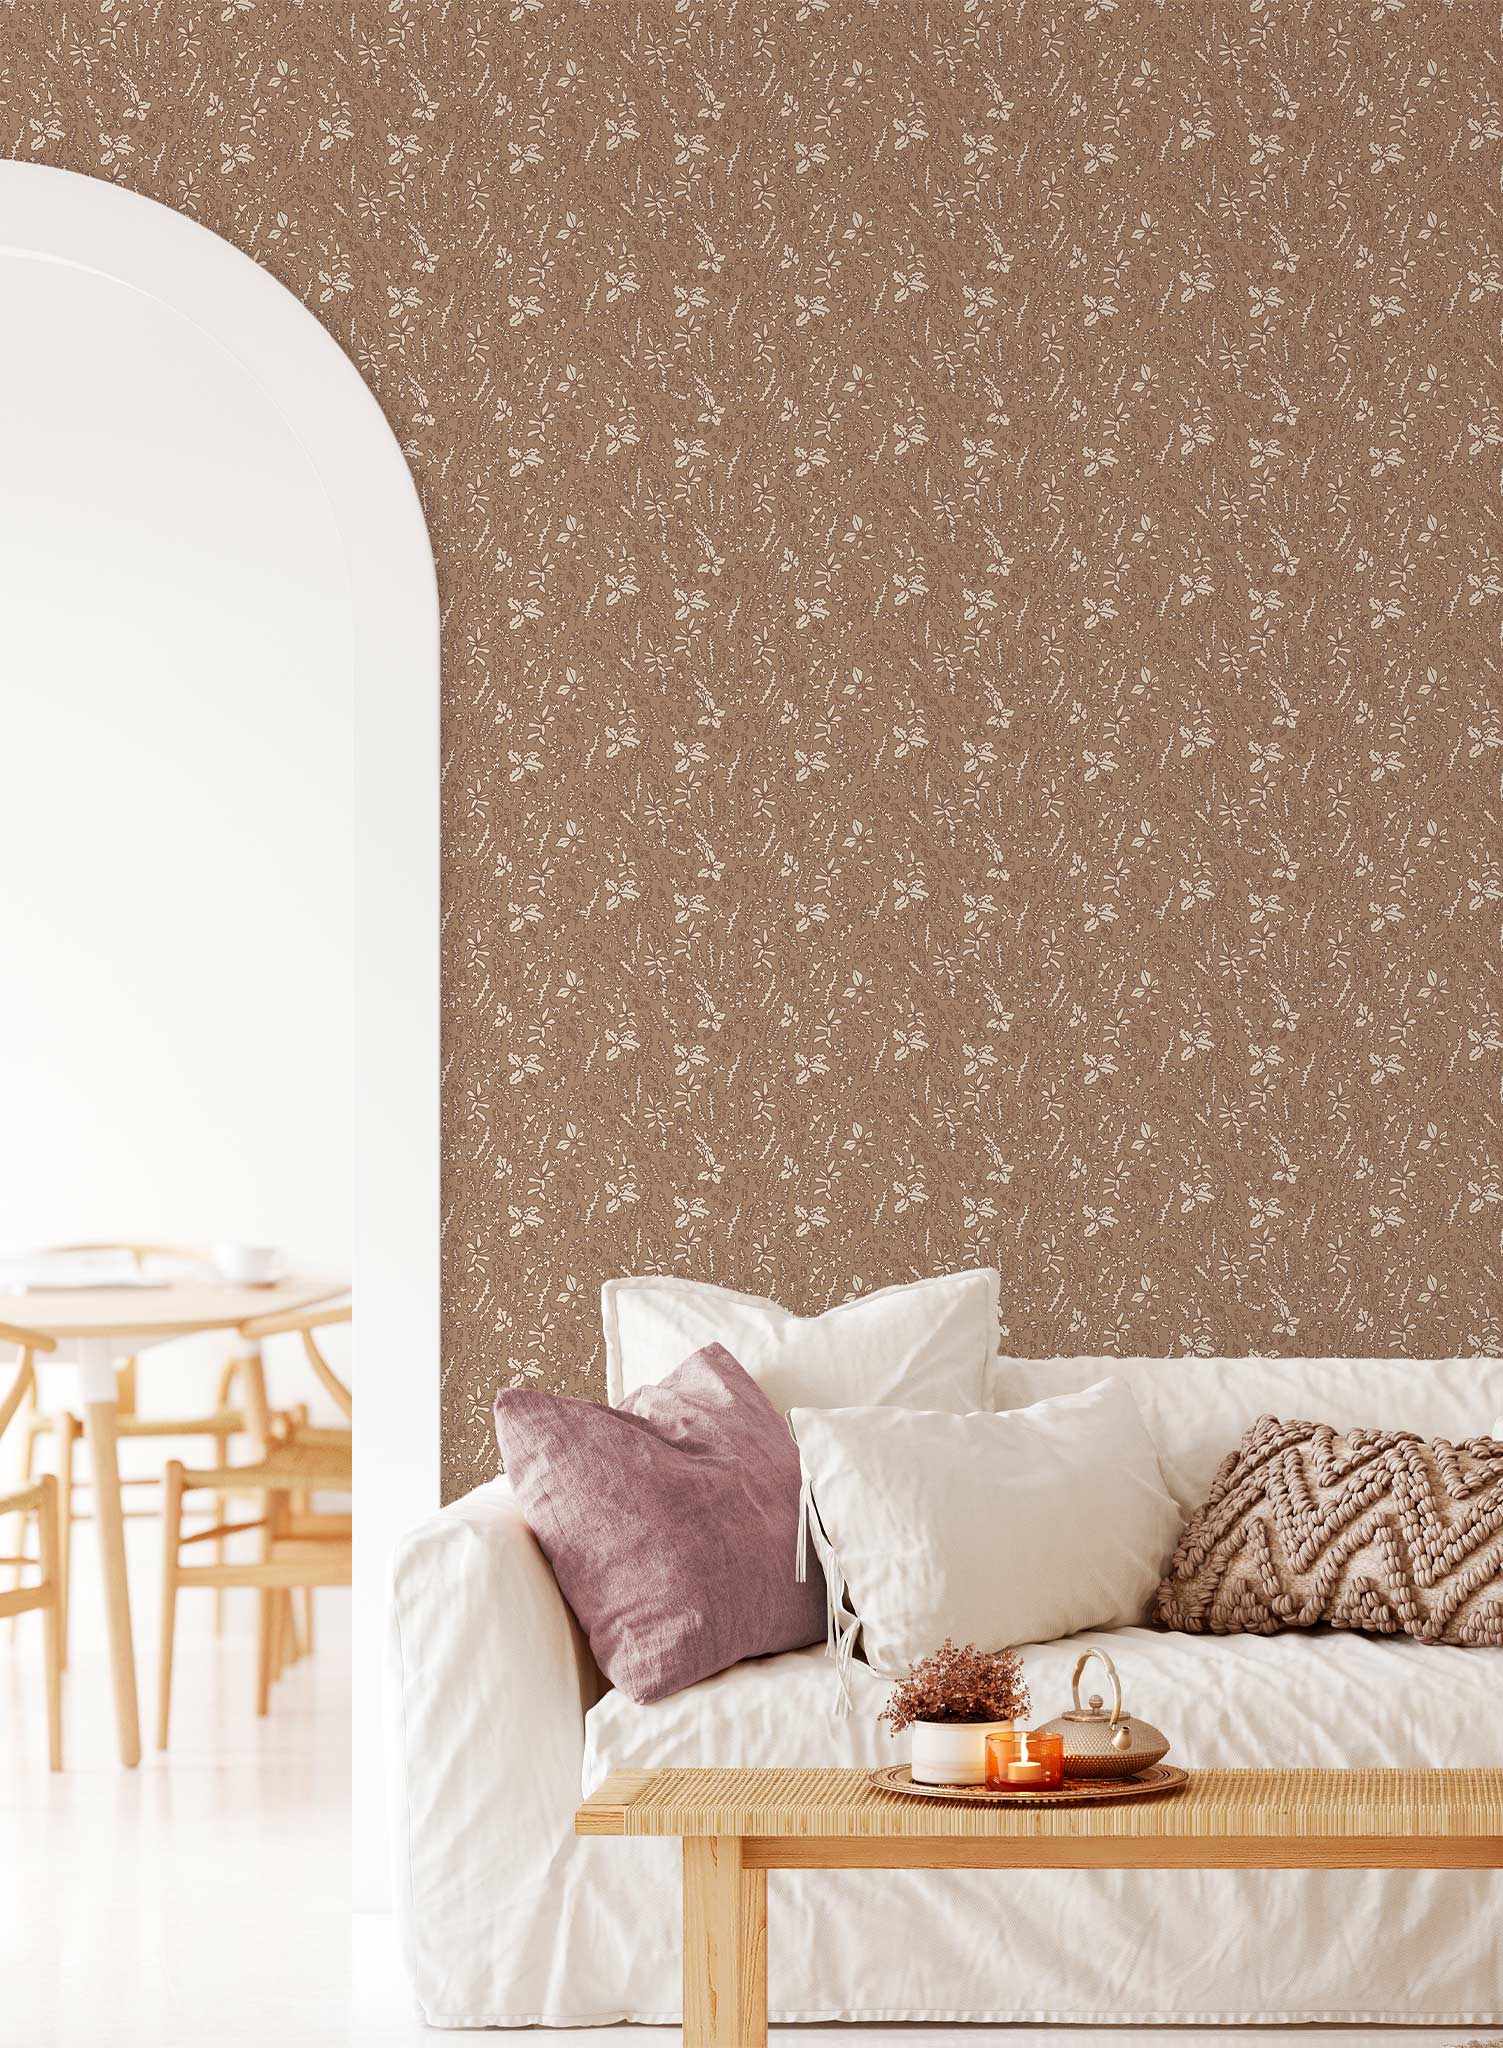 Mossy is a minimalist wallpaper by Opposite Wall of a pattern reminiscent of a moss mat in nature.